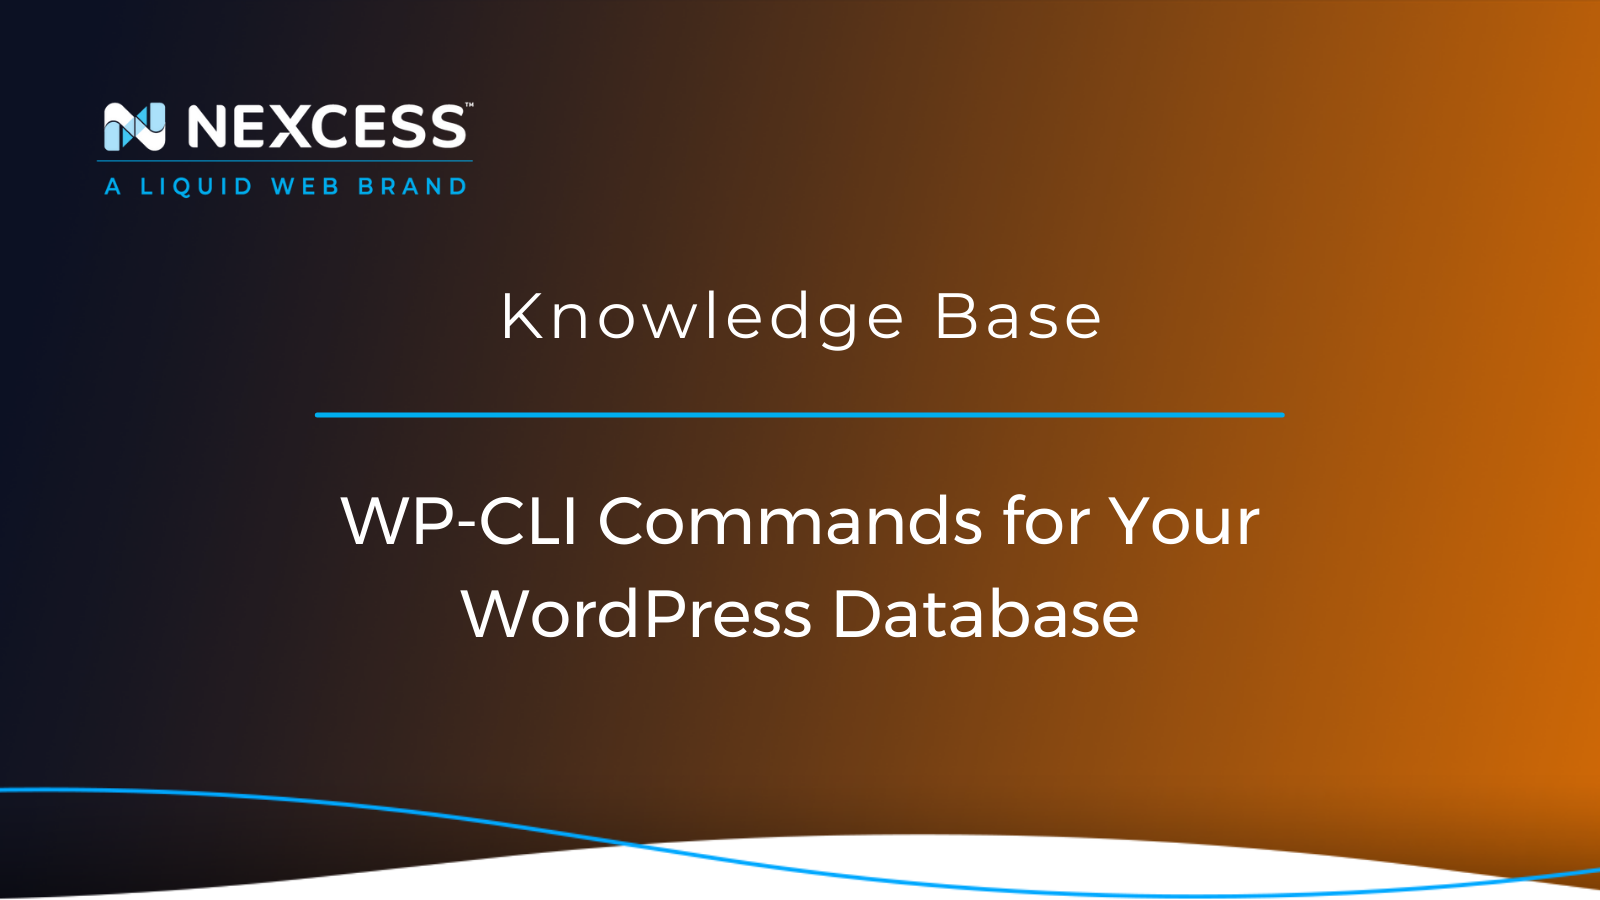 WP-CLI Commands for Your WordPress Database